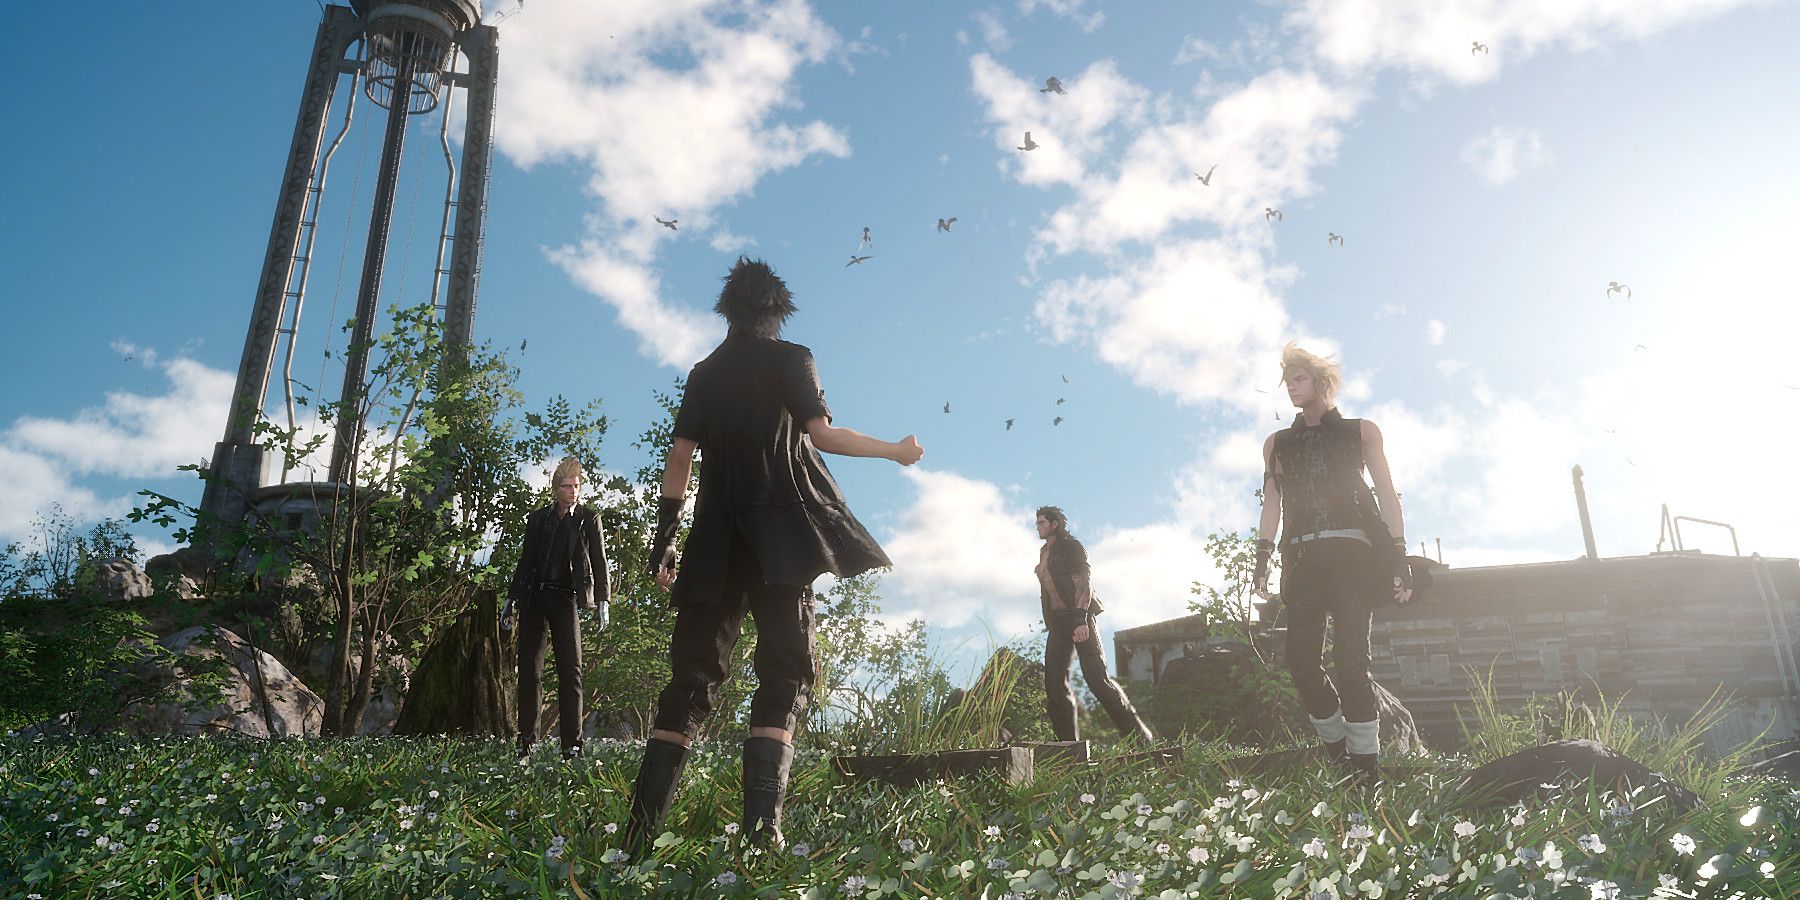 Final Fantasy XV characters standing in a field of flowers.